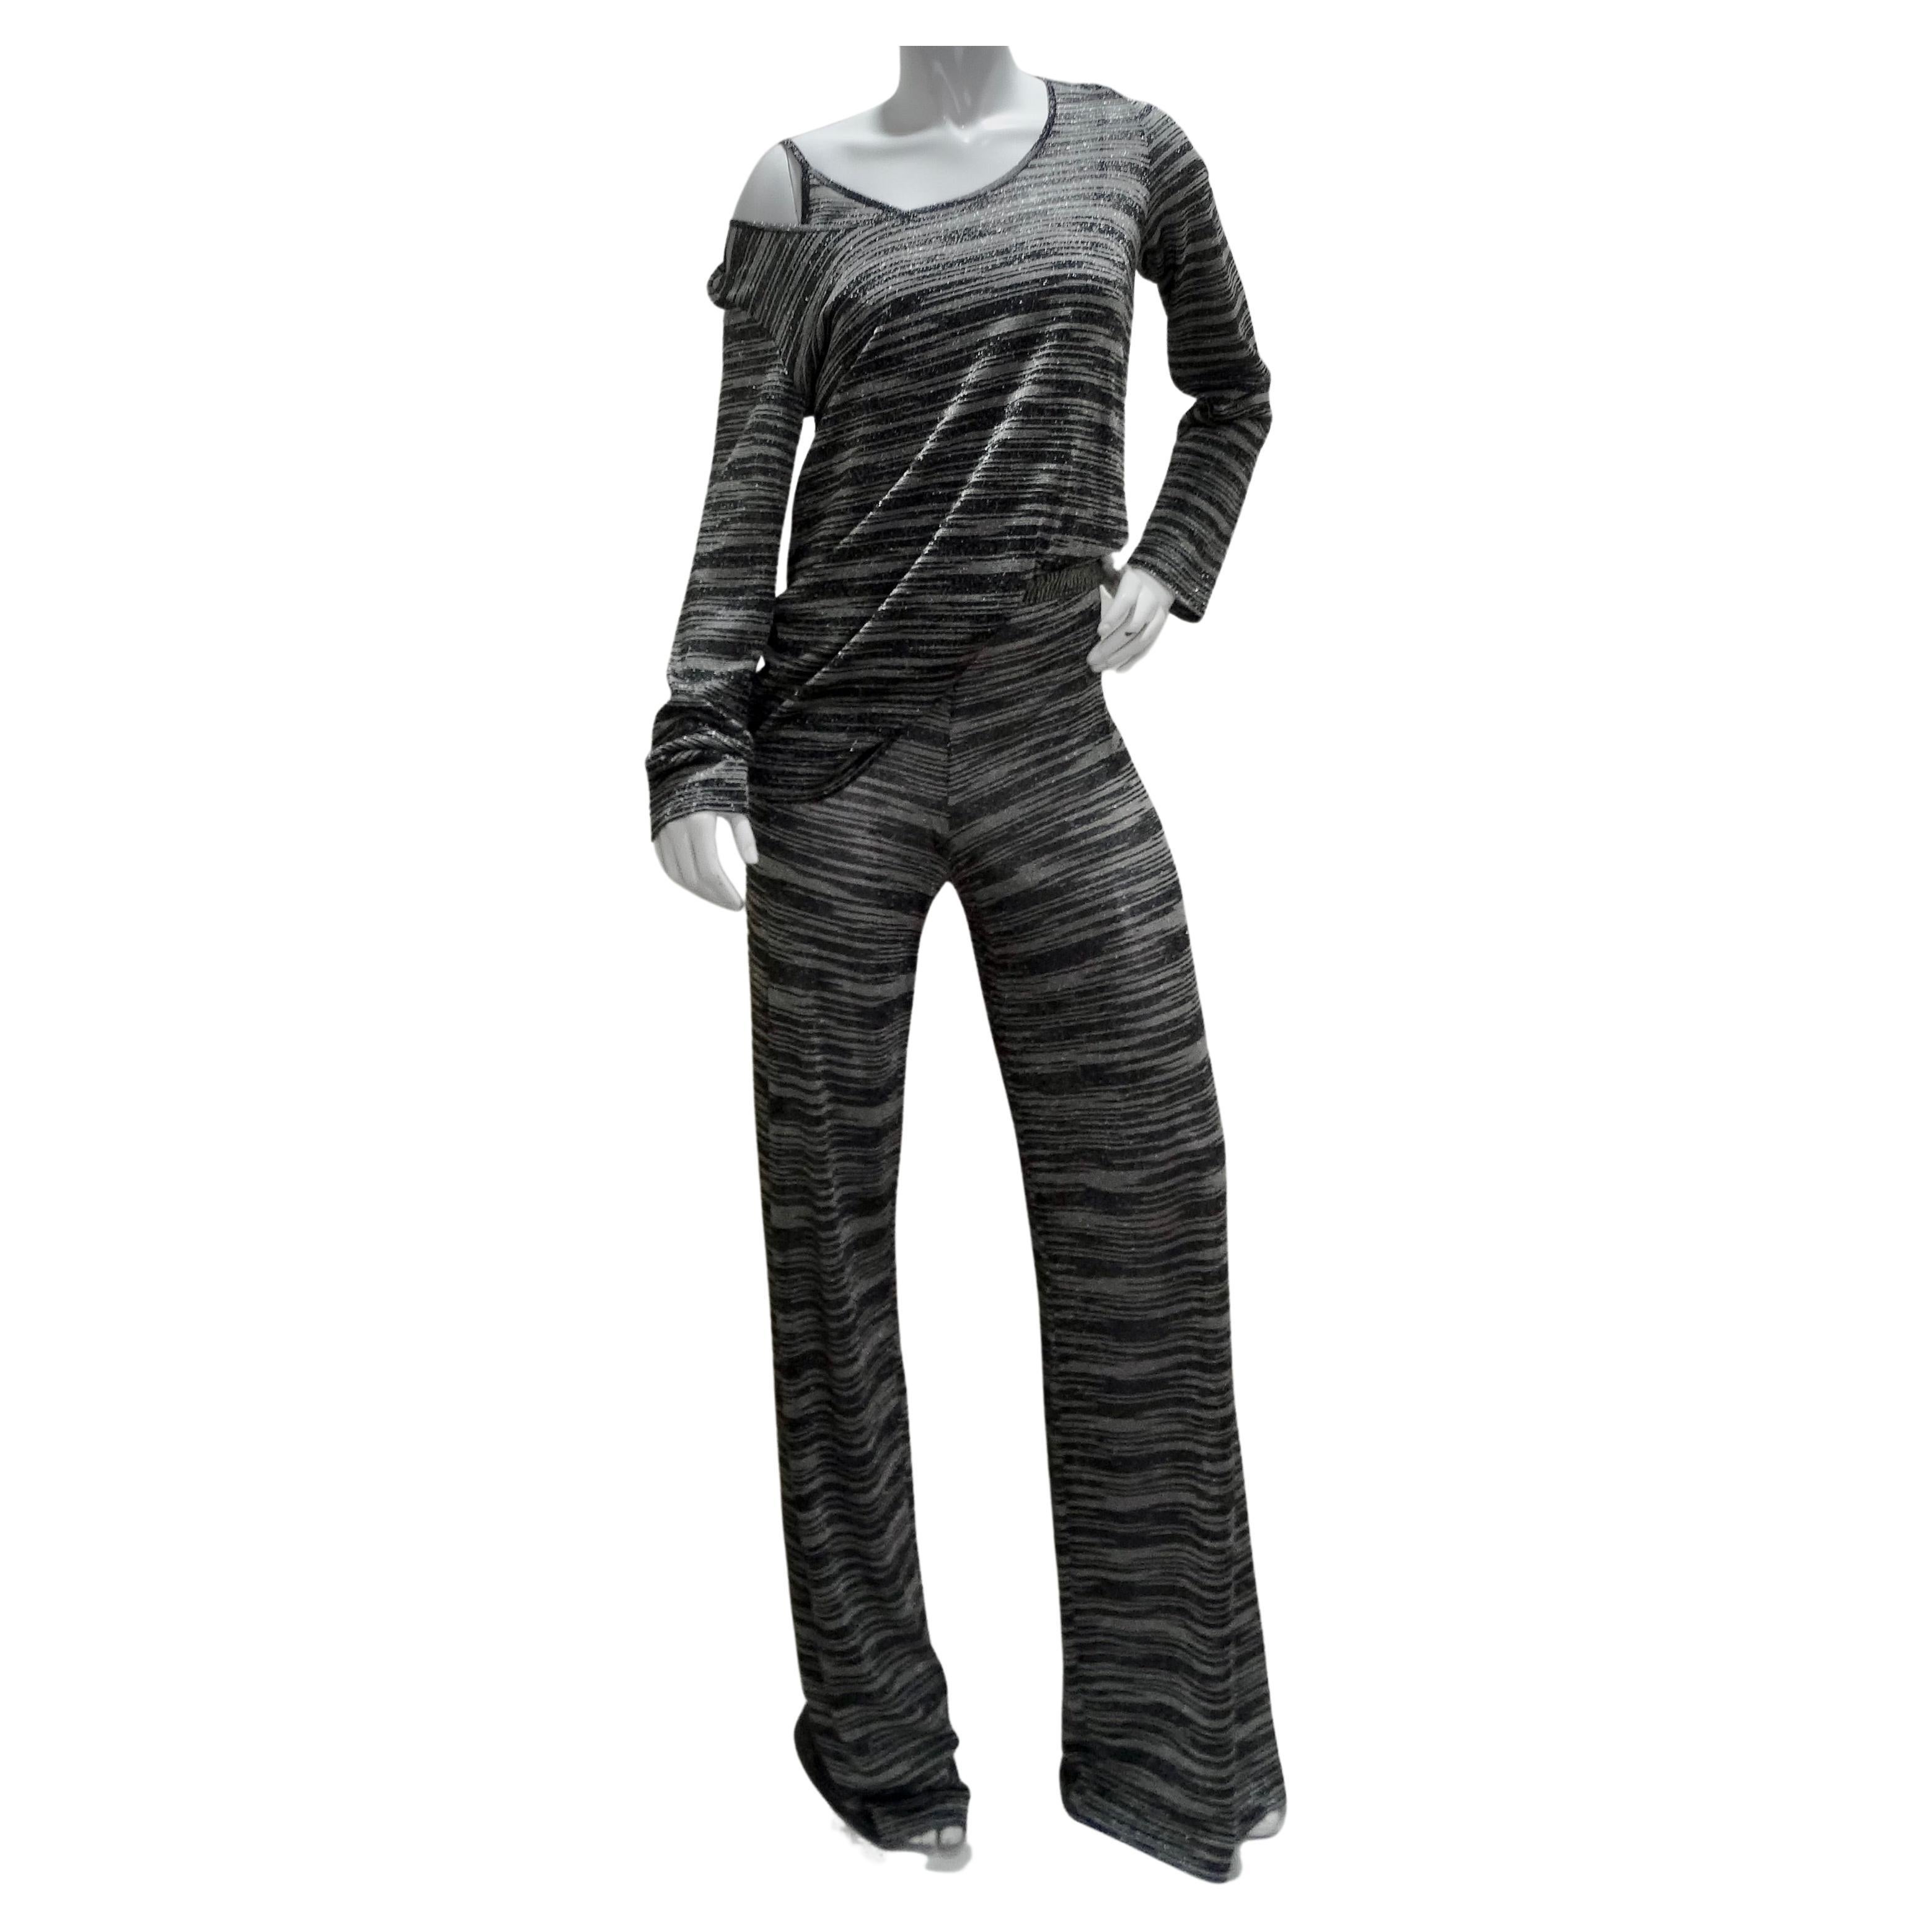 Missoni Neiman Marcus Silver and Black Three Piece Lounge Outfit Set For Sale